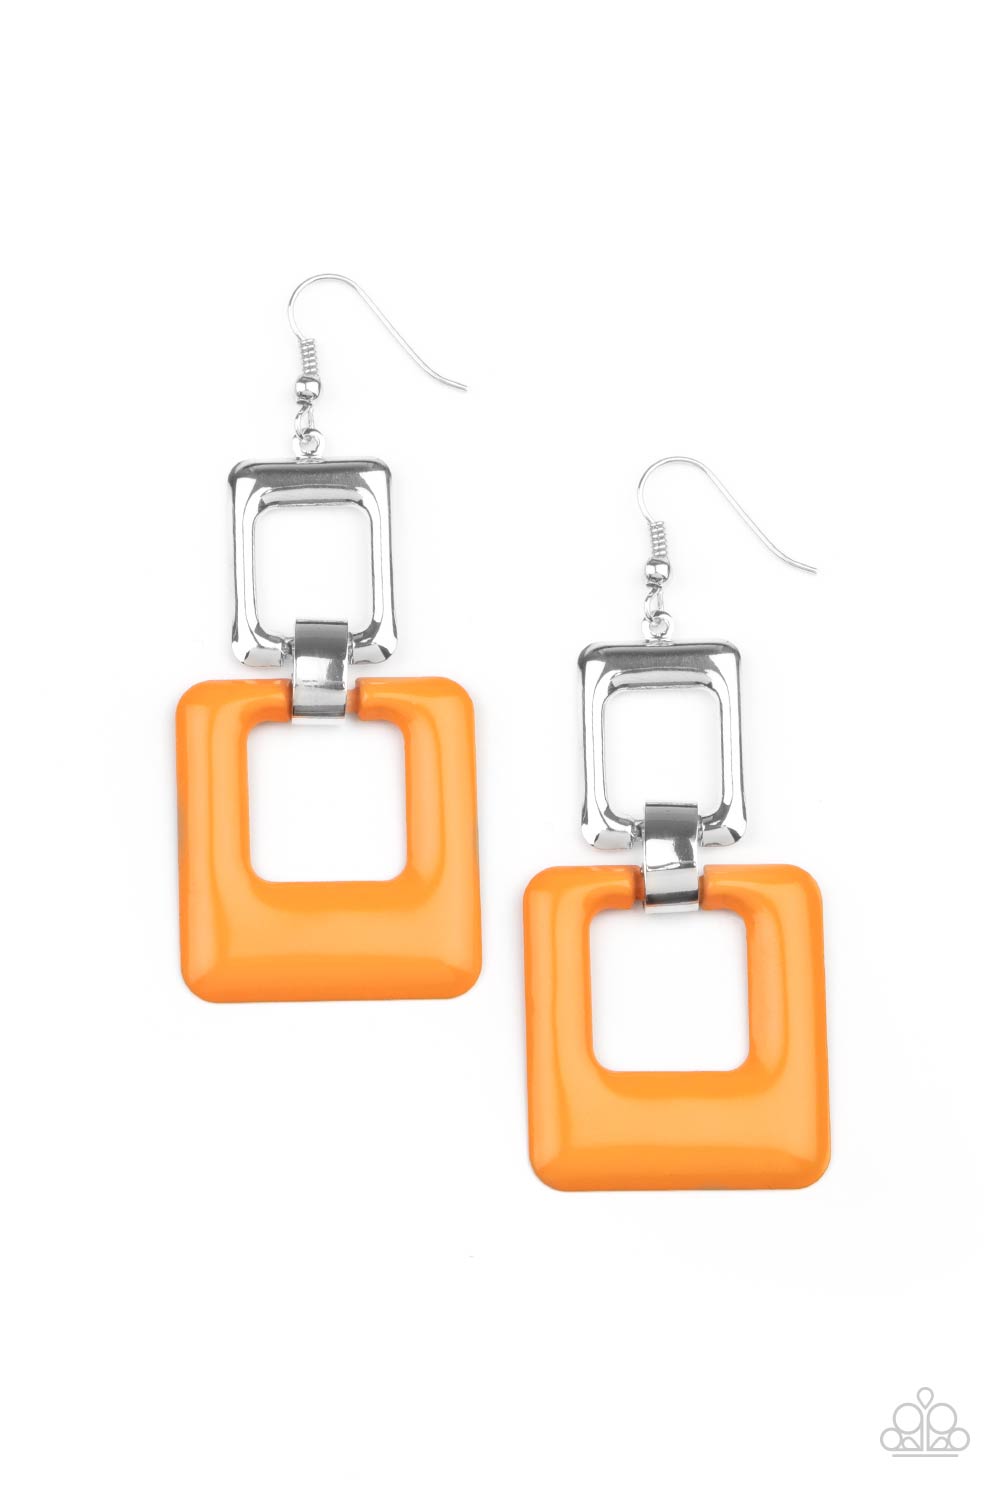 Twice As Nice - Orange Marigold and Silver Earrings - Paparazzi Accessories - Trendy fashion jewelry for everyone - A cutout square painted in the bold Pantone® of Marigold sways from a shiny silver cutout square for a playful finish. Earring attaches to a standard fishhook fitting. Sold as one pair of earrings.